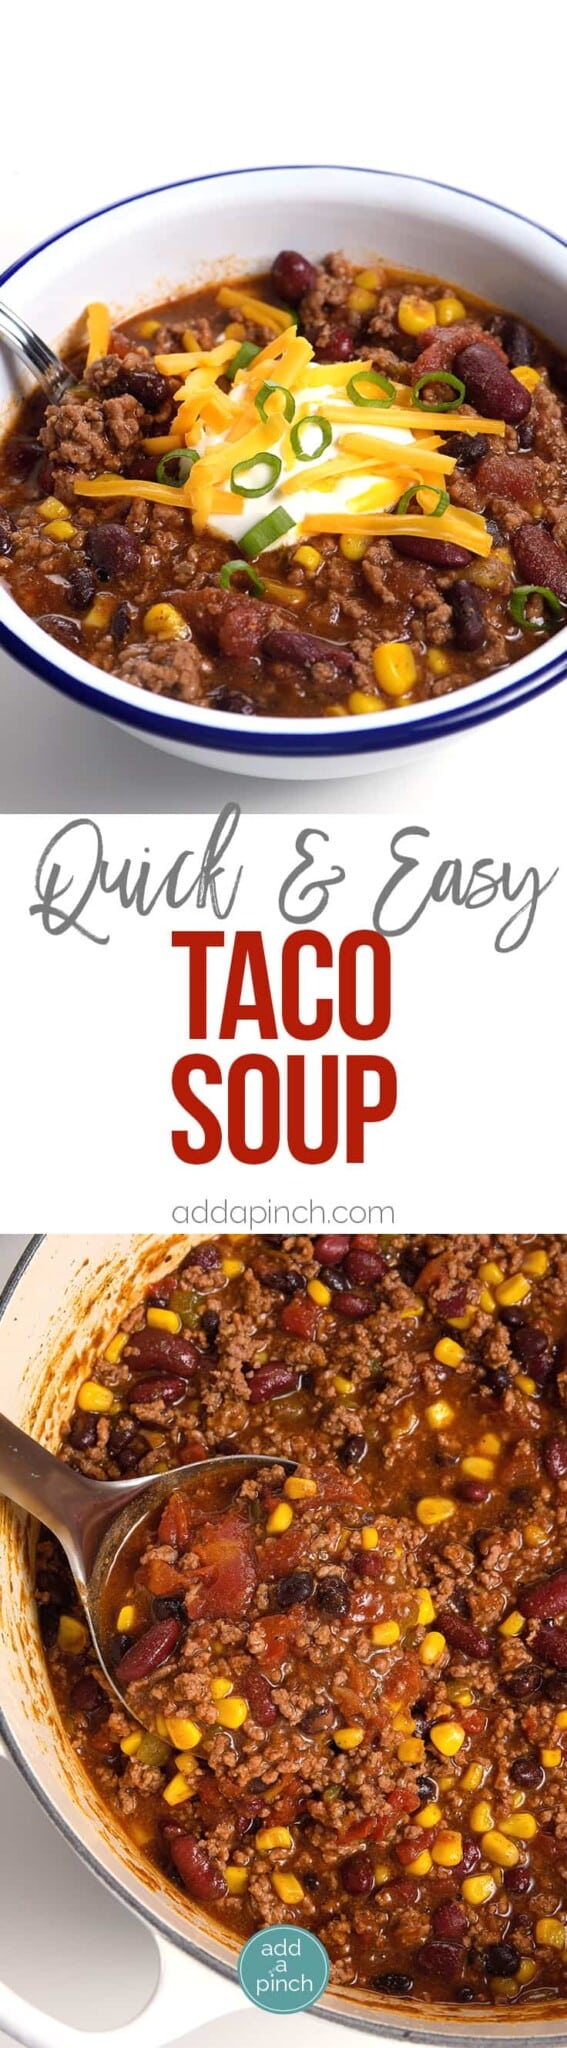 Taco Soup Recipe - So quick and easy, this taco soup recipe is flavorful and delicious! Made with ground beef, beans, corn, it is on the table in less than 30 minutes! // addapinch.com